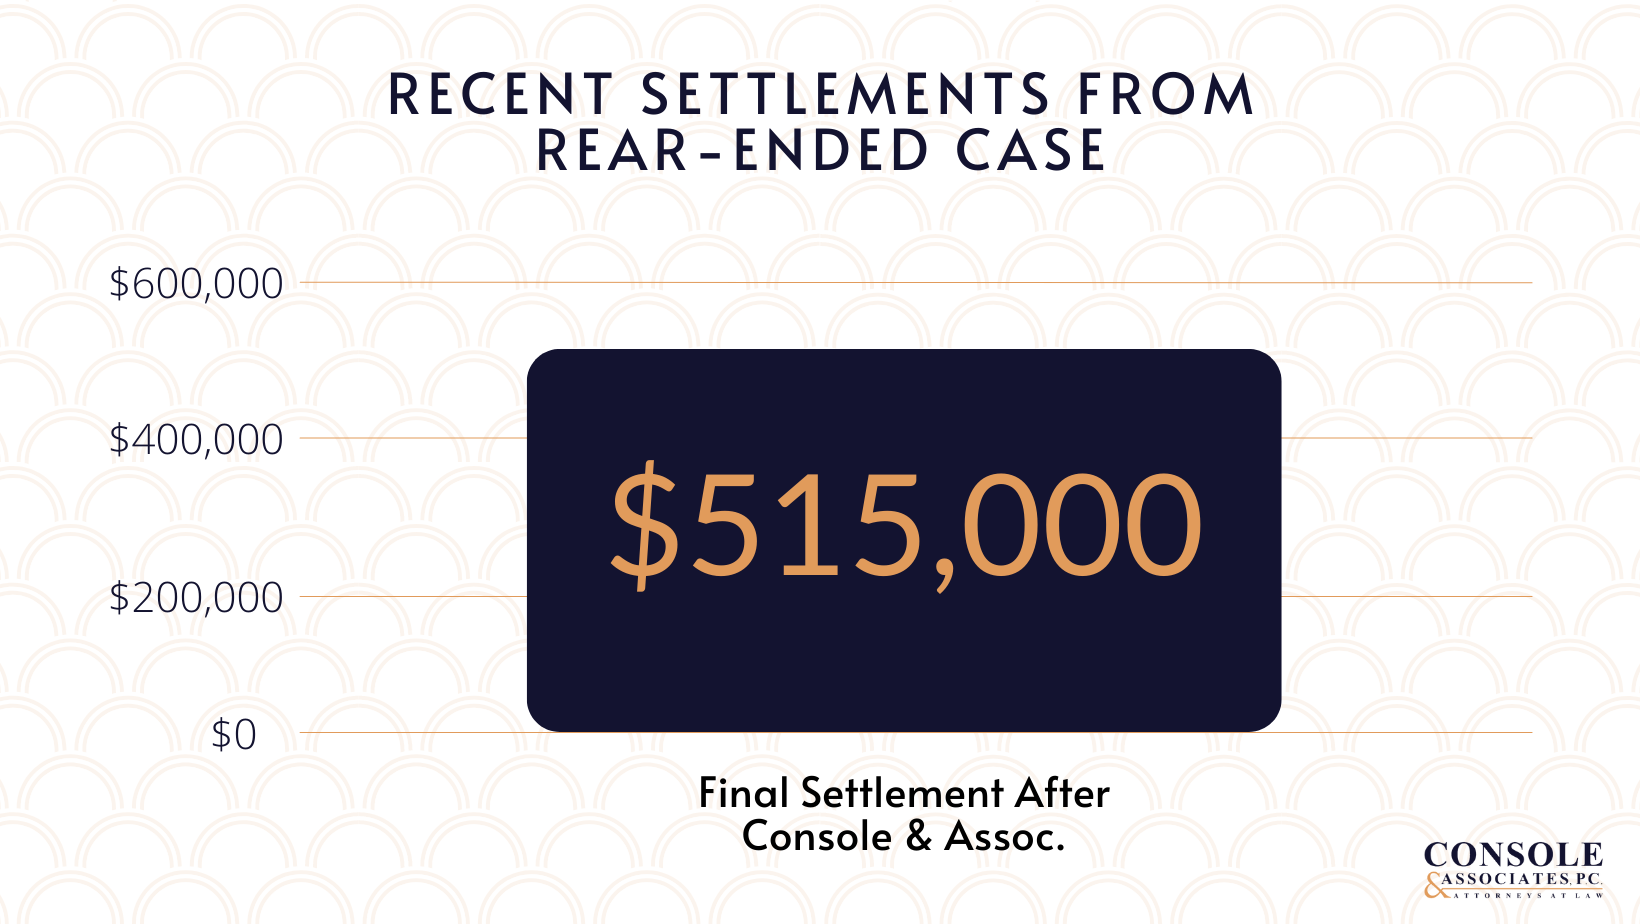 Console & Associates Recent Settlements From Rear-Ended Case